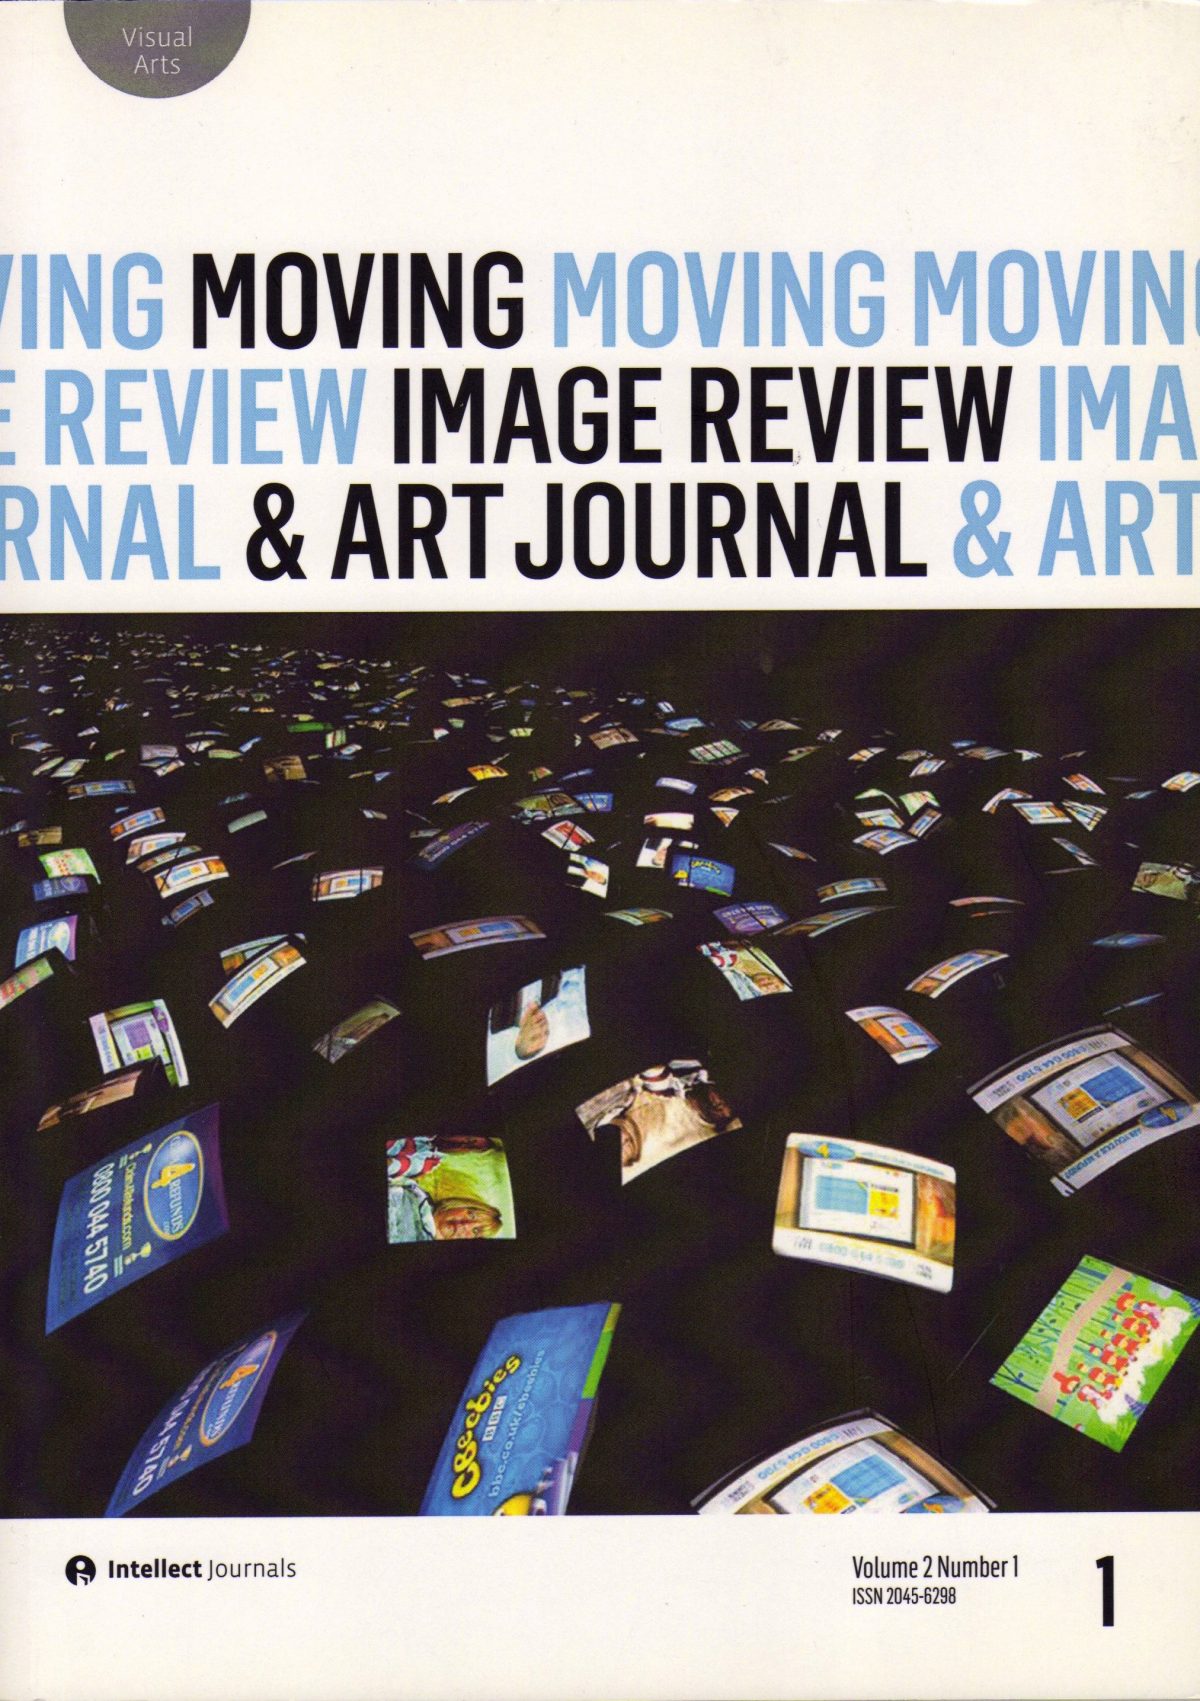 Articles in journals / exhibition catalogues